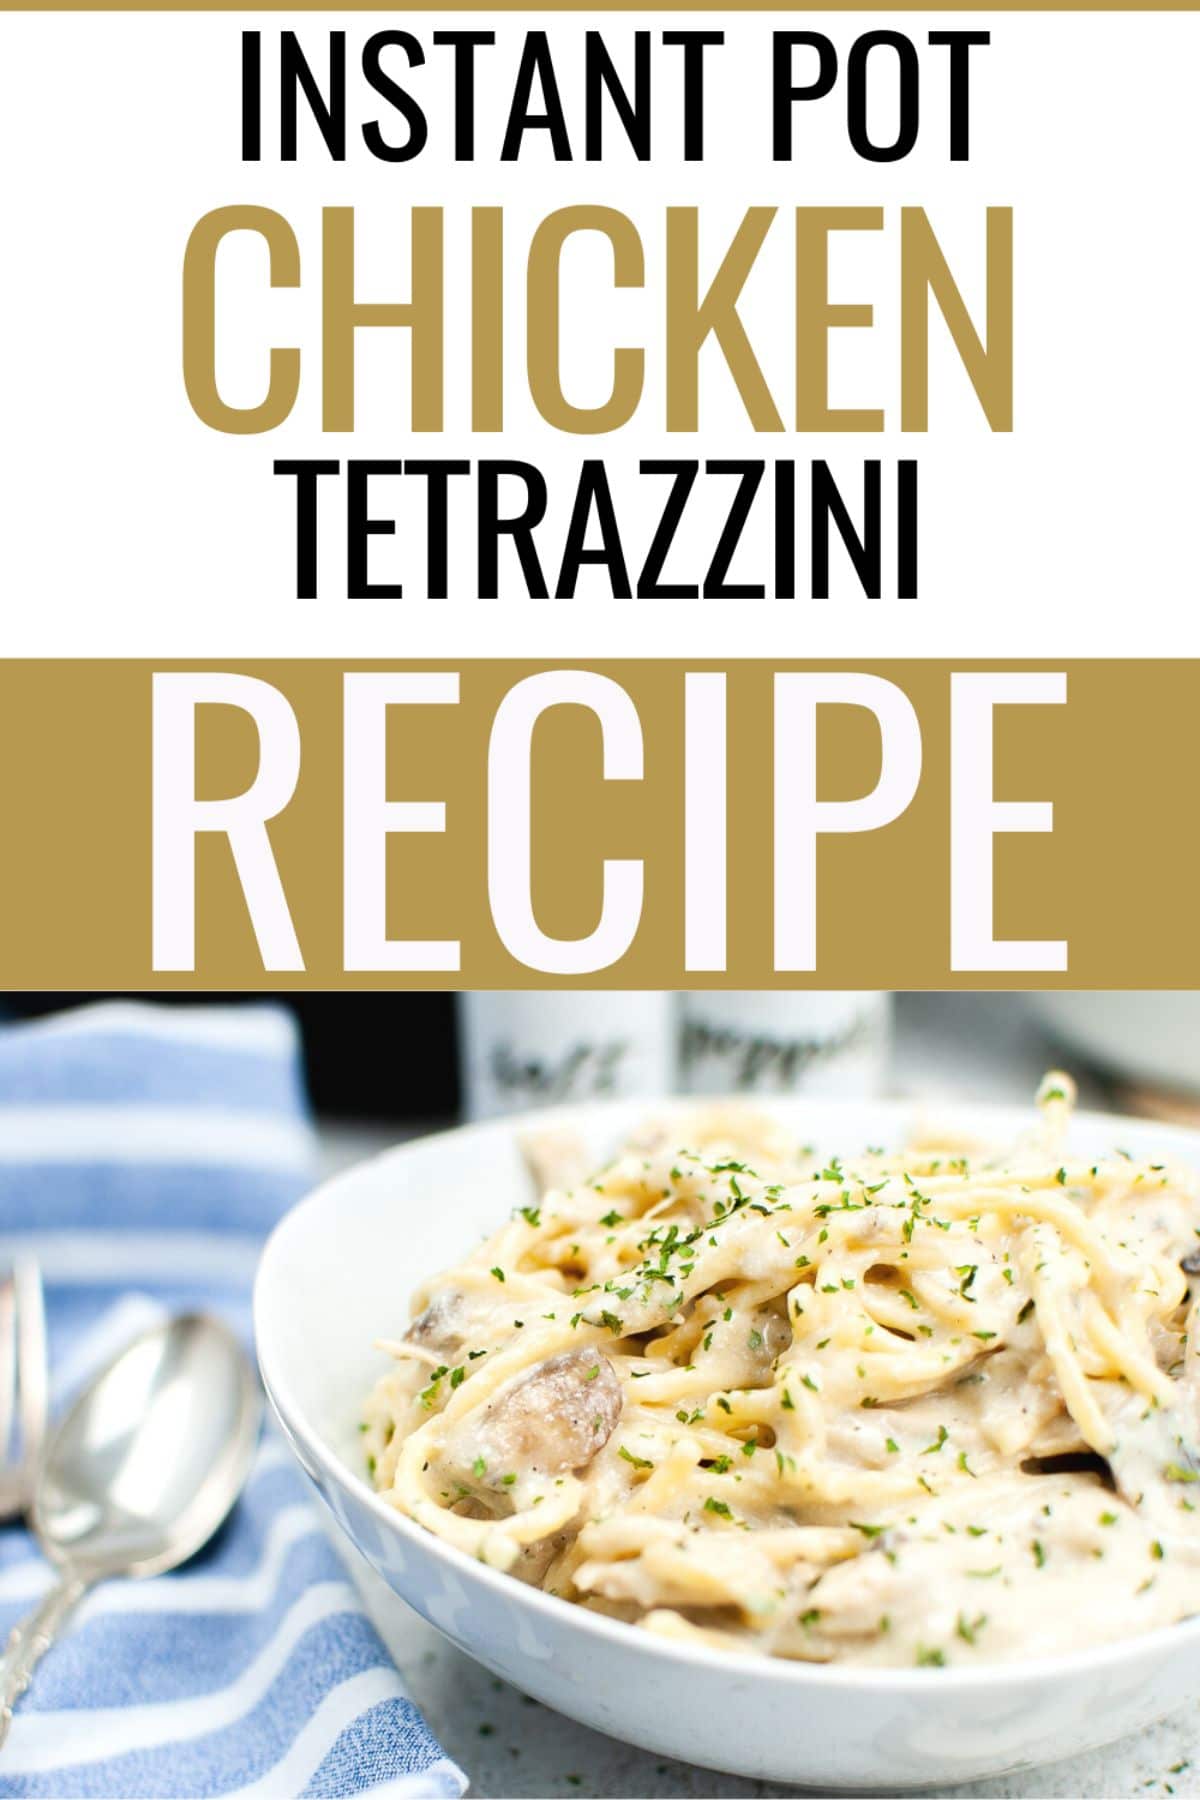 Instant Pot Chicken Tetrazzini in white serving bowl with a large text at the upper half of the image saying "Instant Pot Chicken Tetrazzini Recipe"